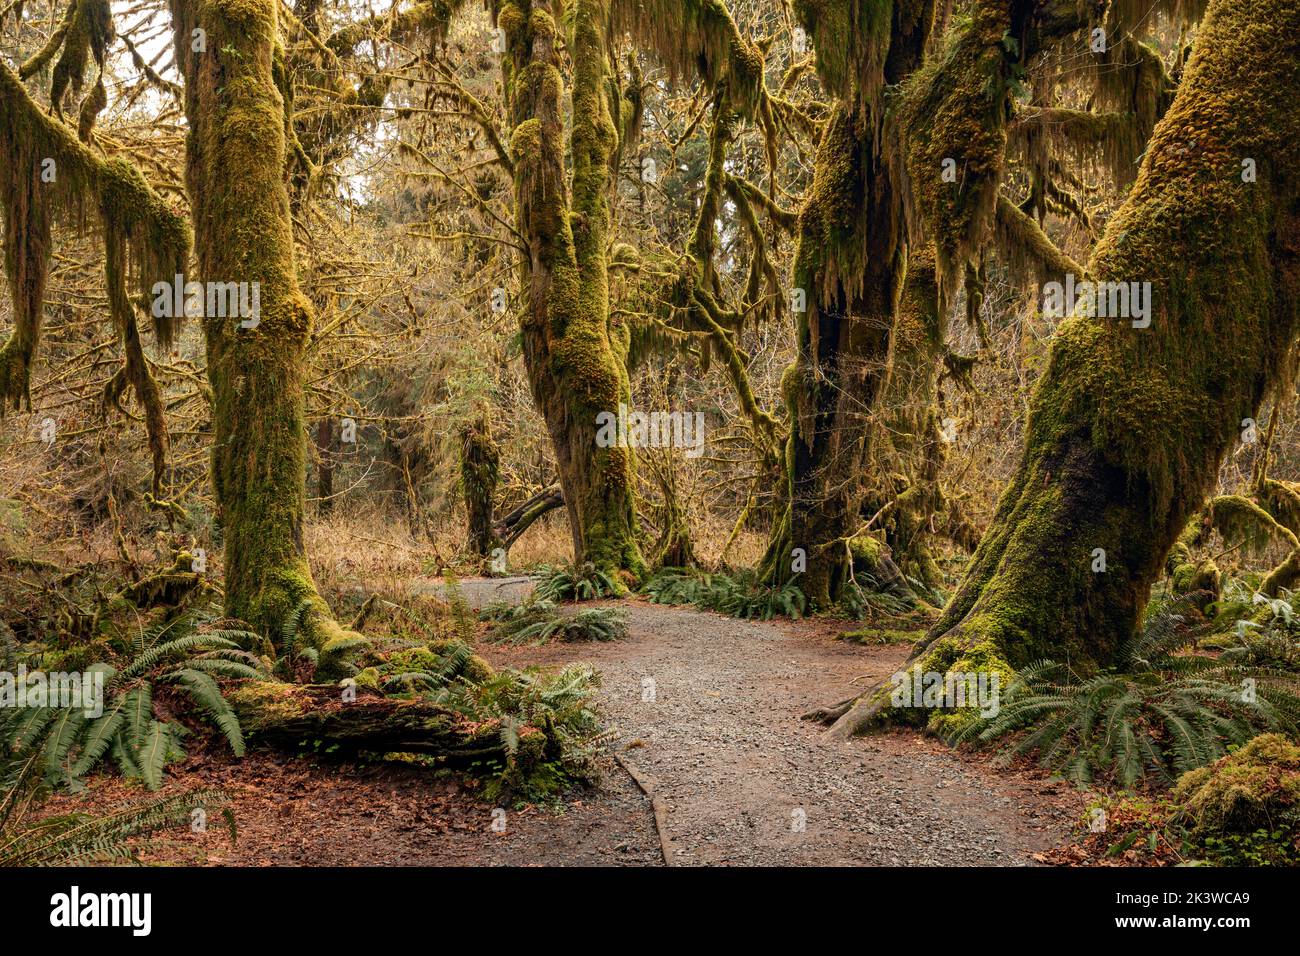 WA22101-00...WASHINGTON - Maple trees covered with moss  in the Hall of Mosses, part of the Hoh Rain Forest , In Olympic National Park. Stock Photo